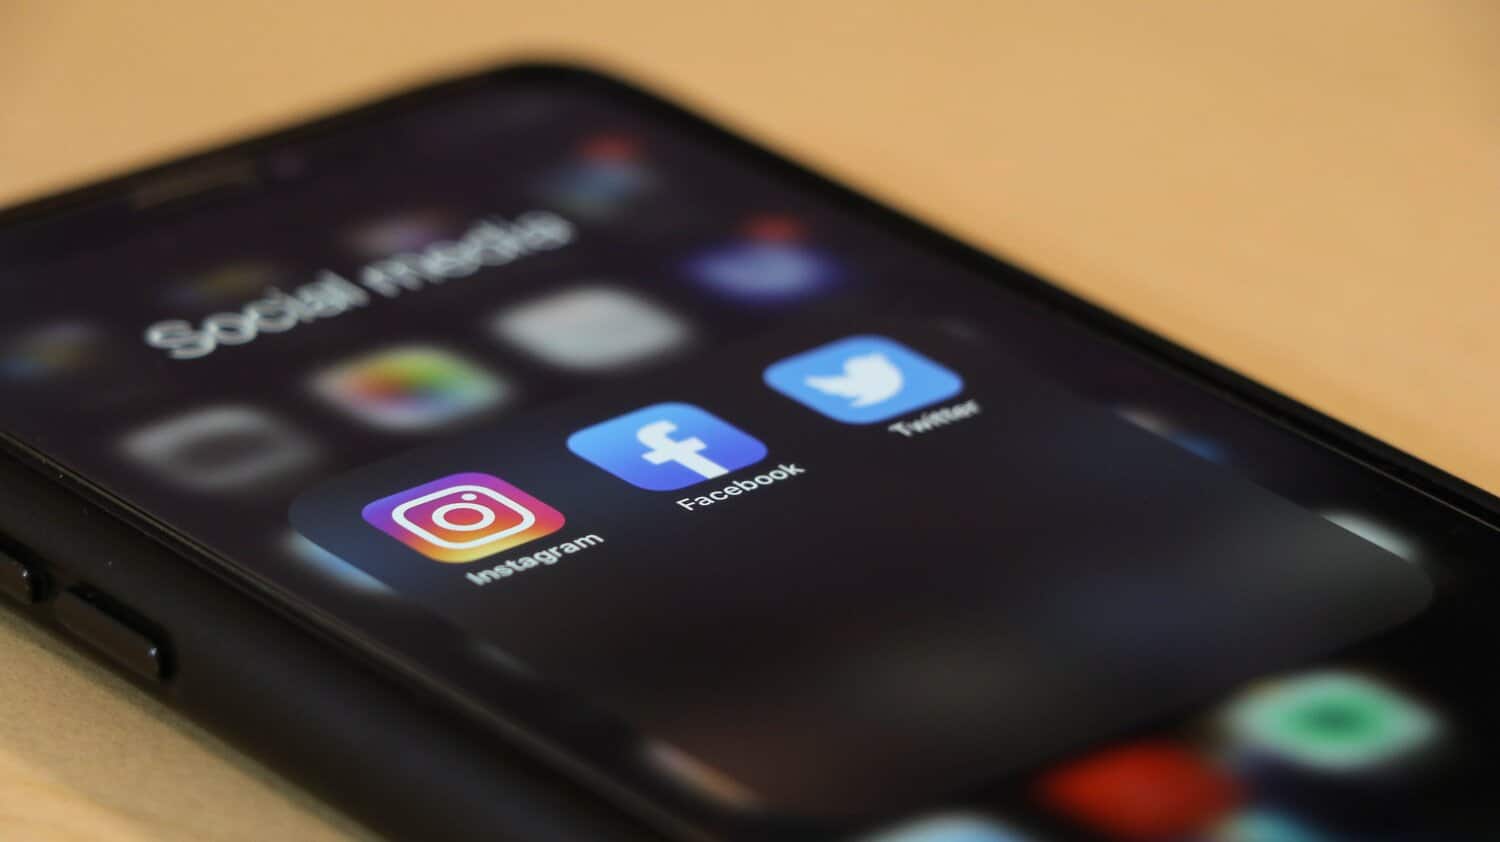 iPhone displaying a social media folder with Instagram, Facebook, and Twitter